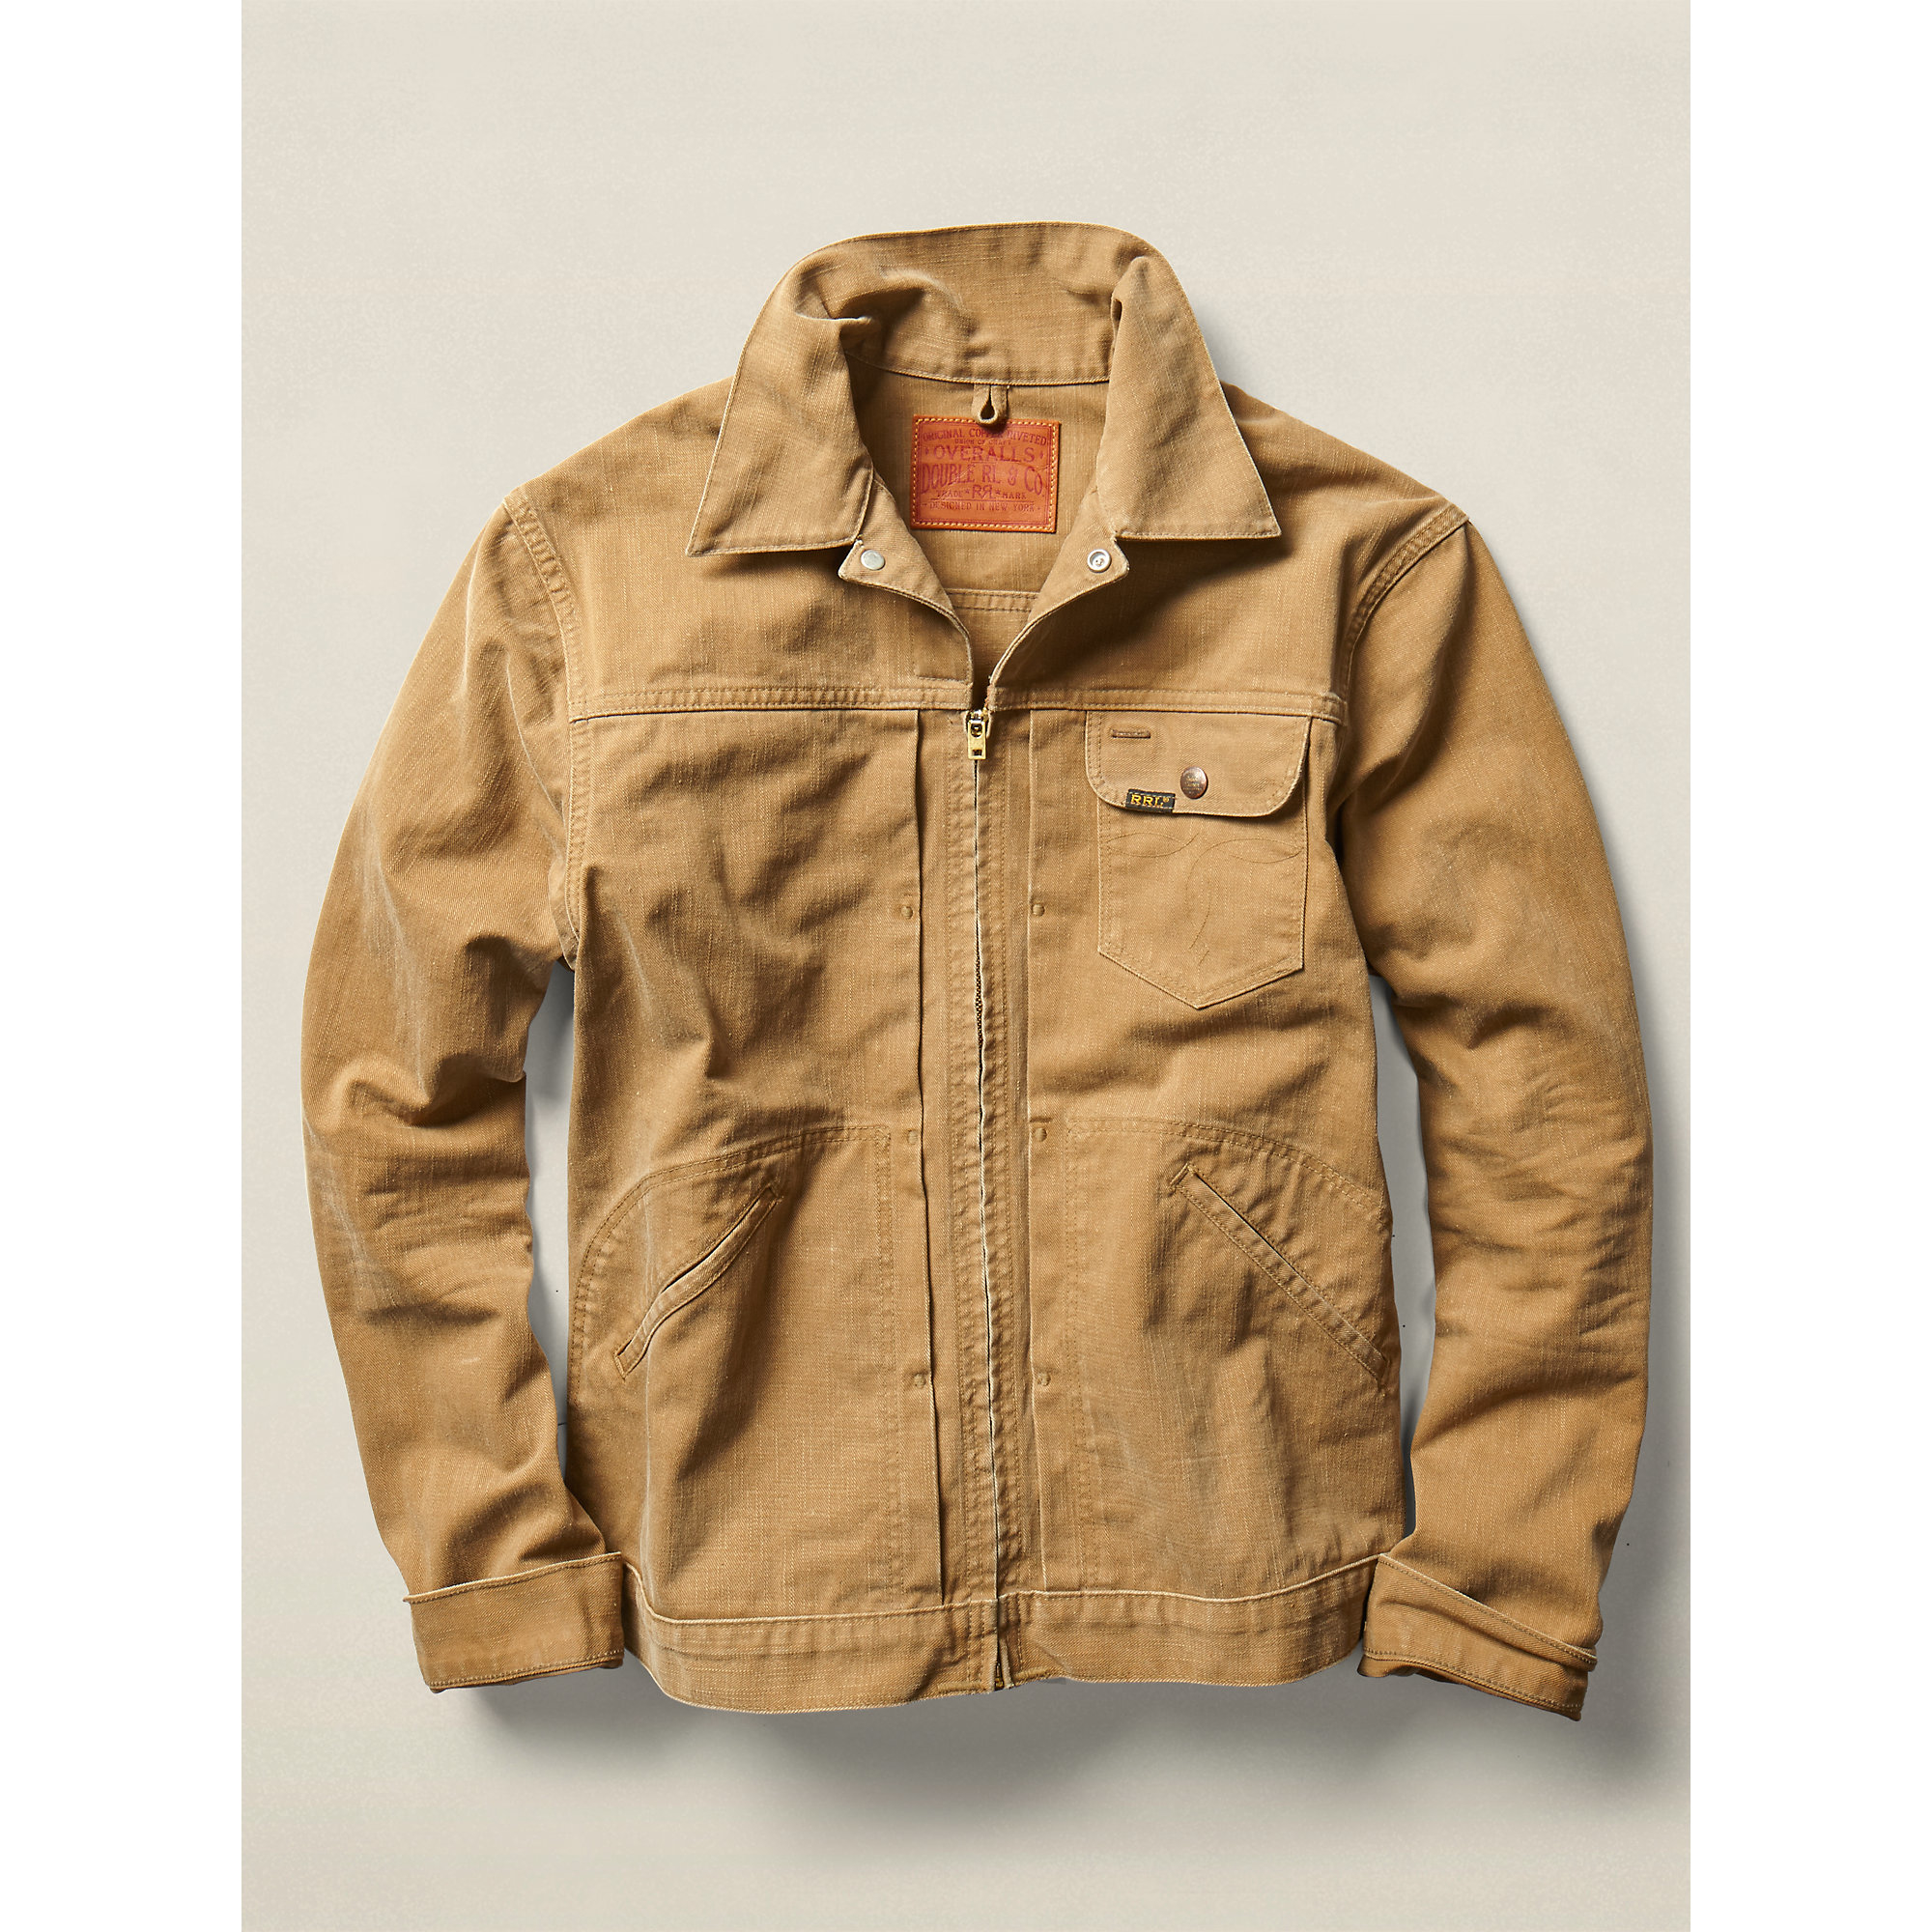 RRL Cotton Twill Jacket in Brown for Men - Lyst